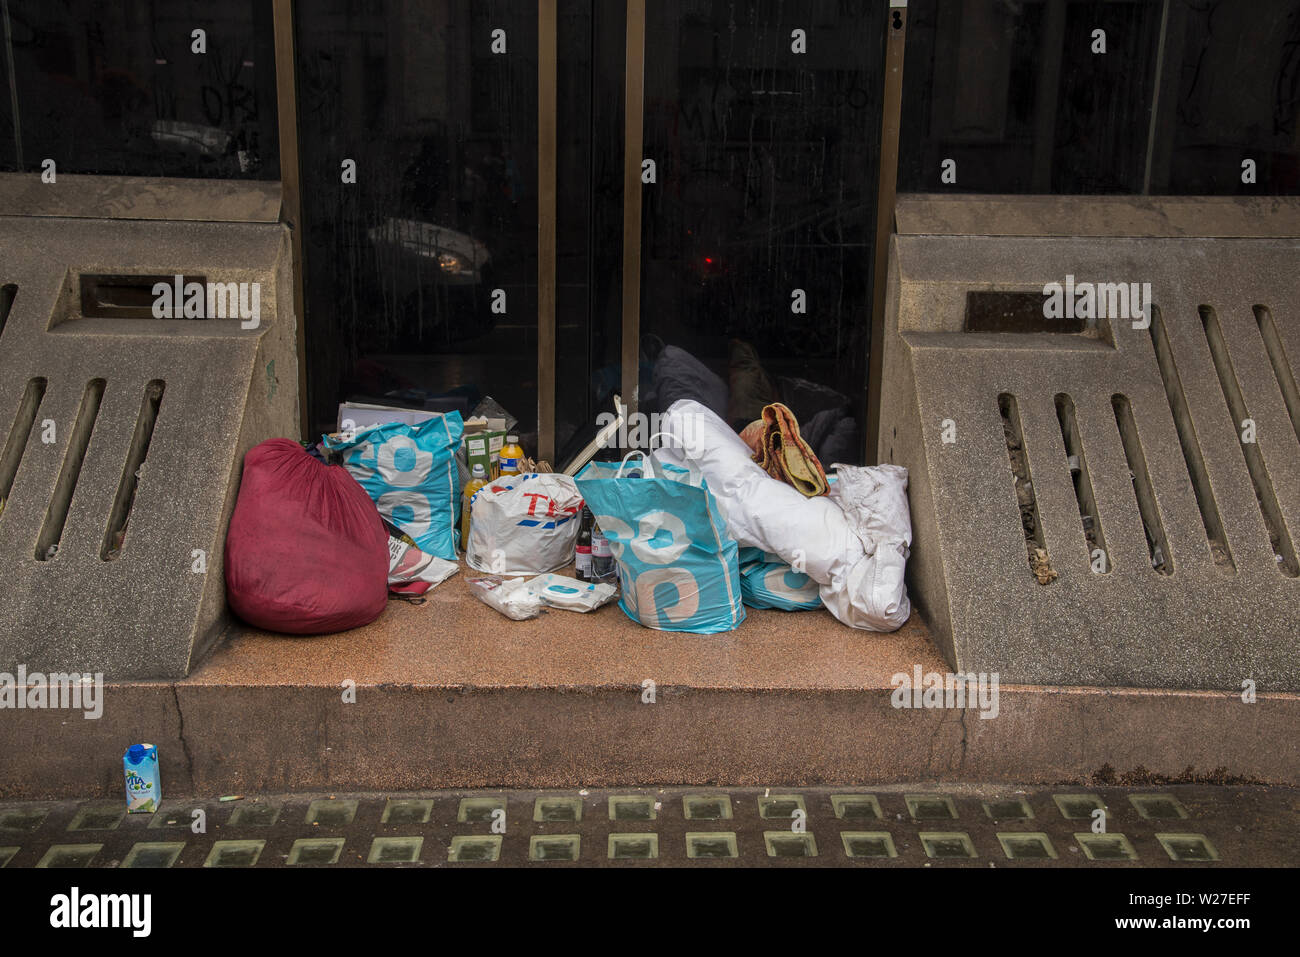 A homeless persons belongings in a doorway in Whitehall, Westminster in the center of LondonLondon 2019 Stock Photo